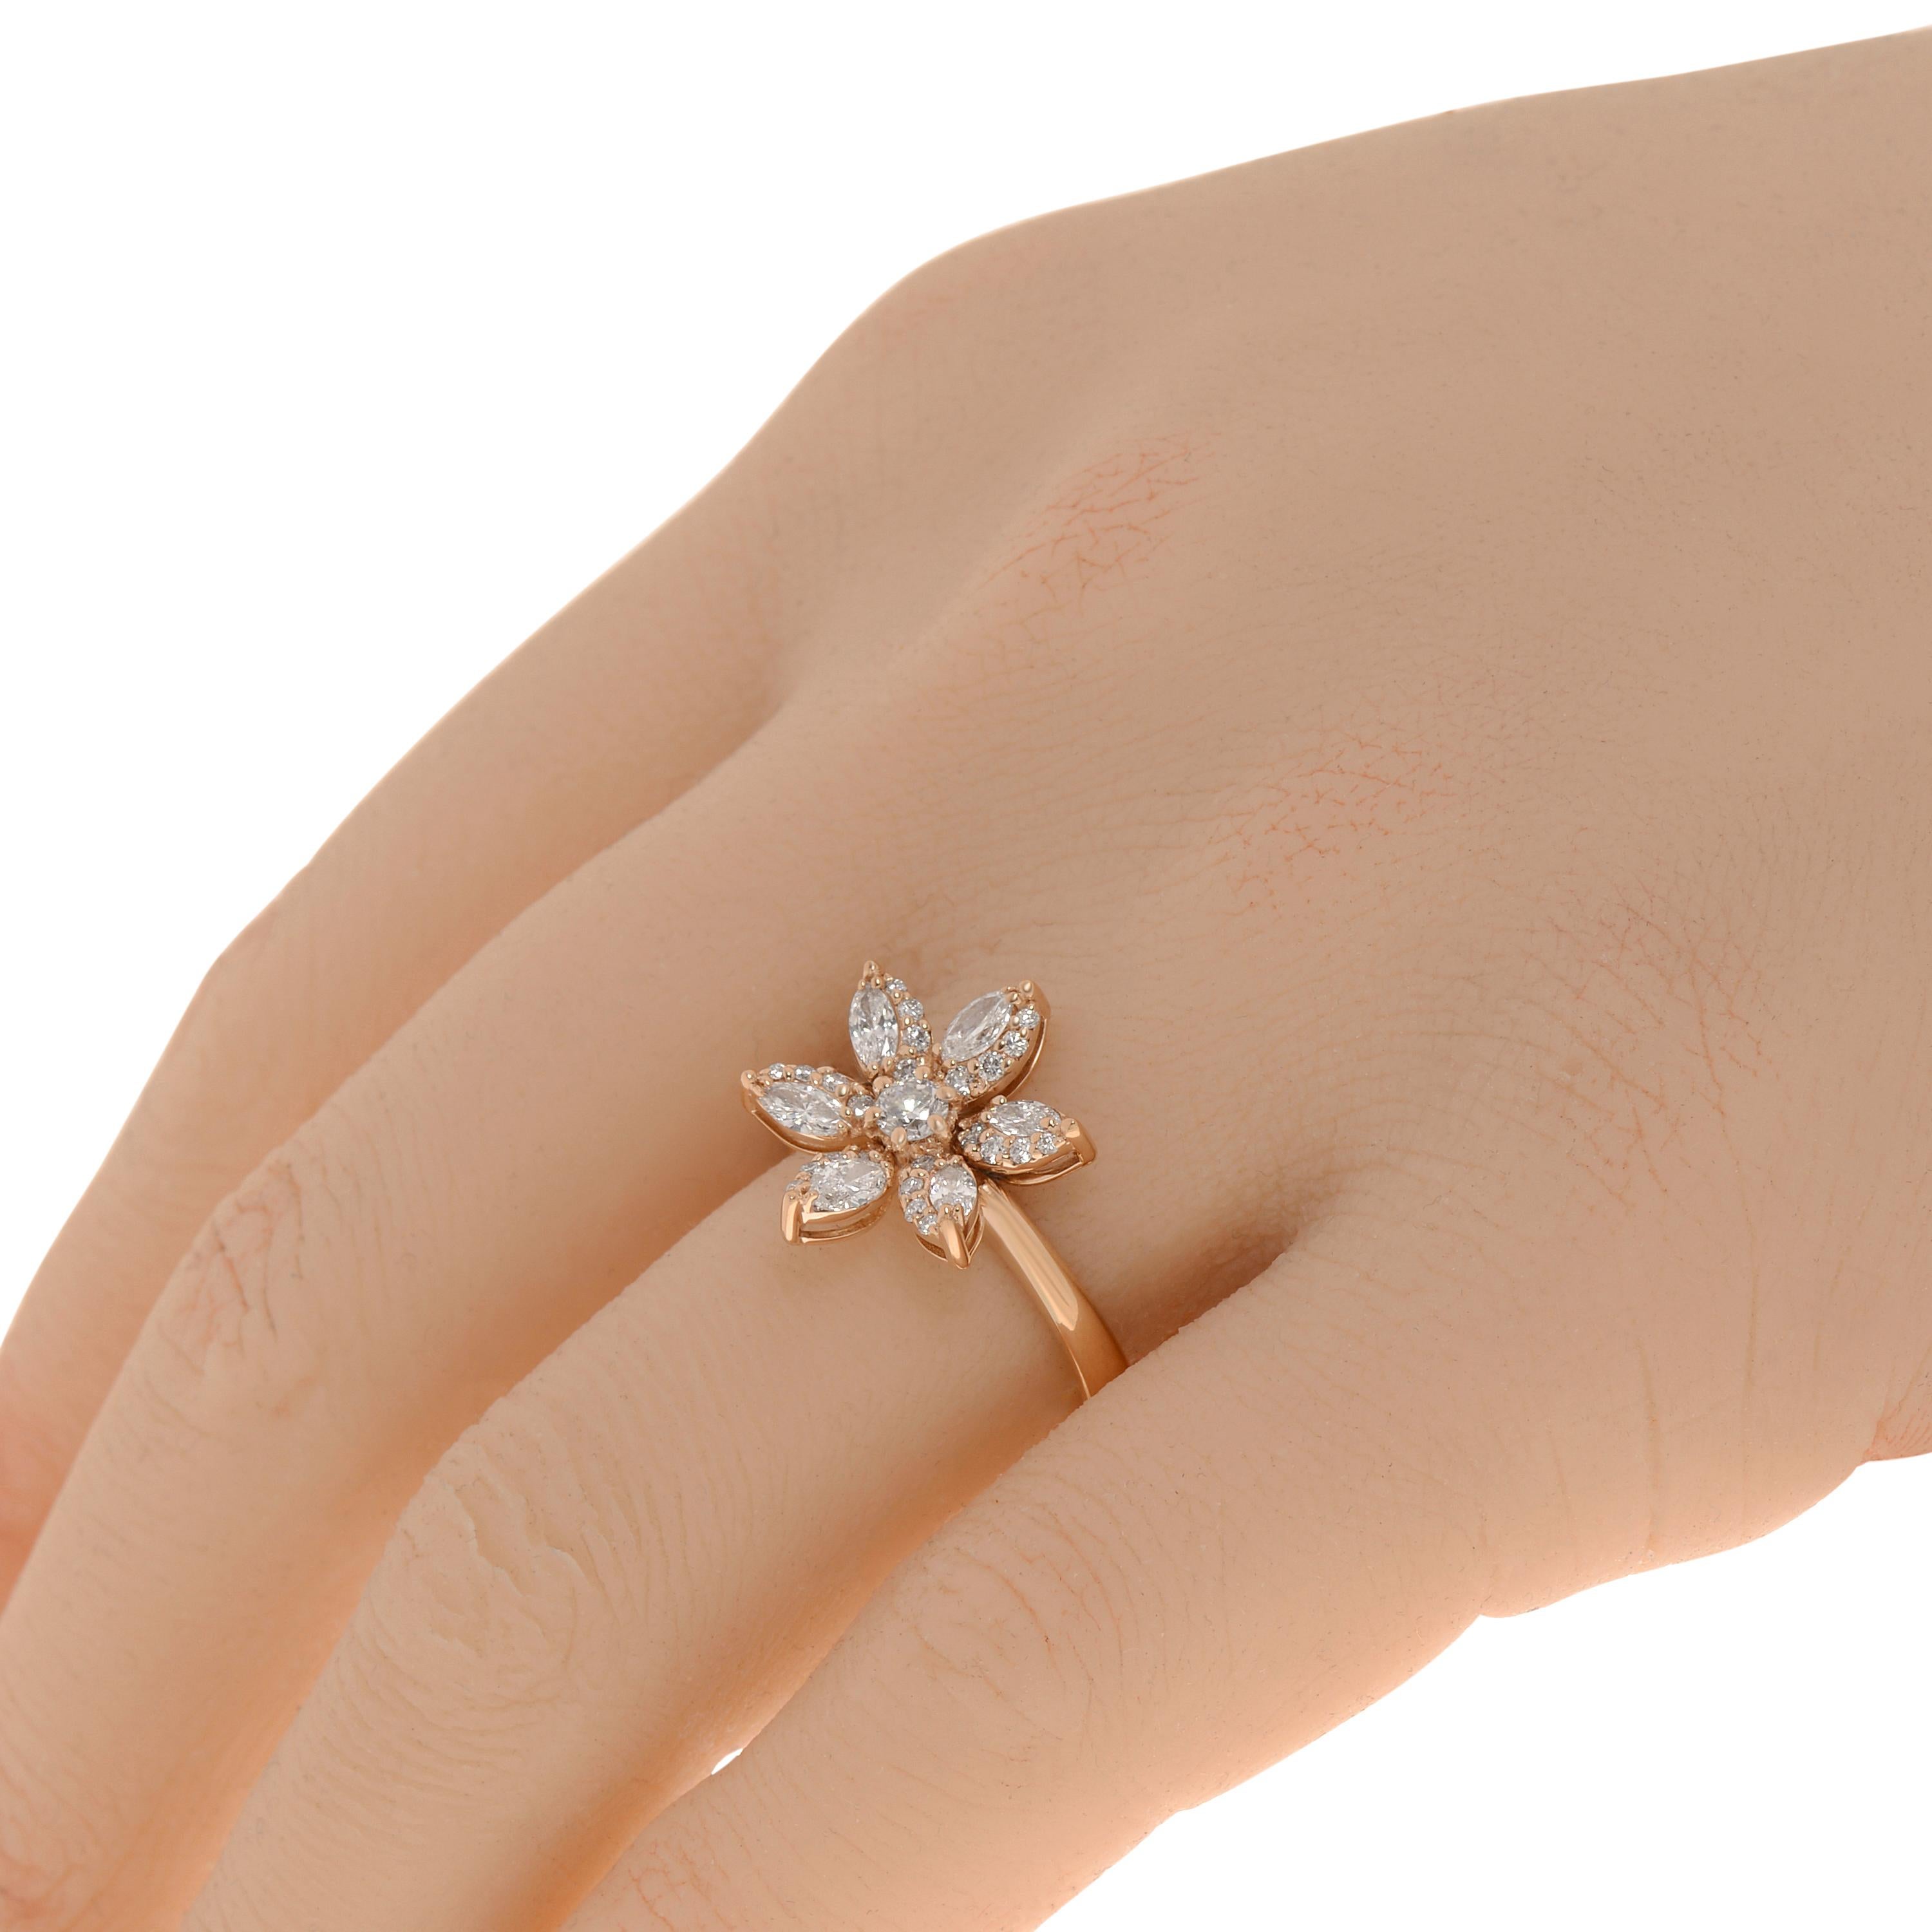 Damiani 18K rose gold ring features a glamorous flower made with 0.69ct. tw. marquise and round cut white diamonds. The ring size is 6.5 (53.1). The decoration size is 1/2